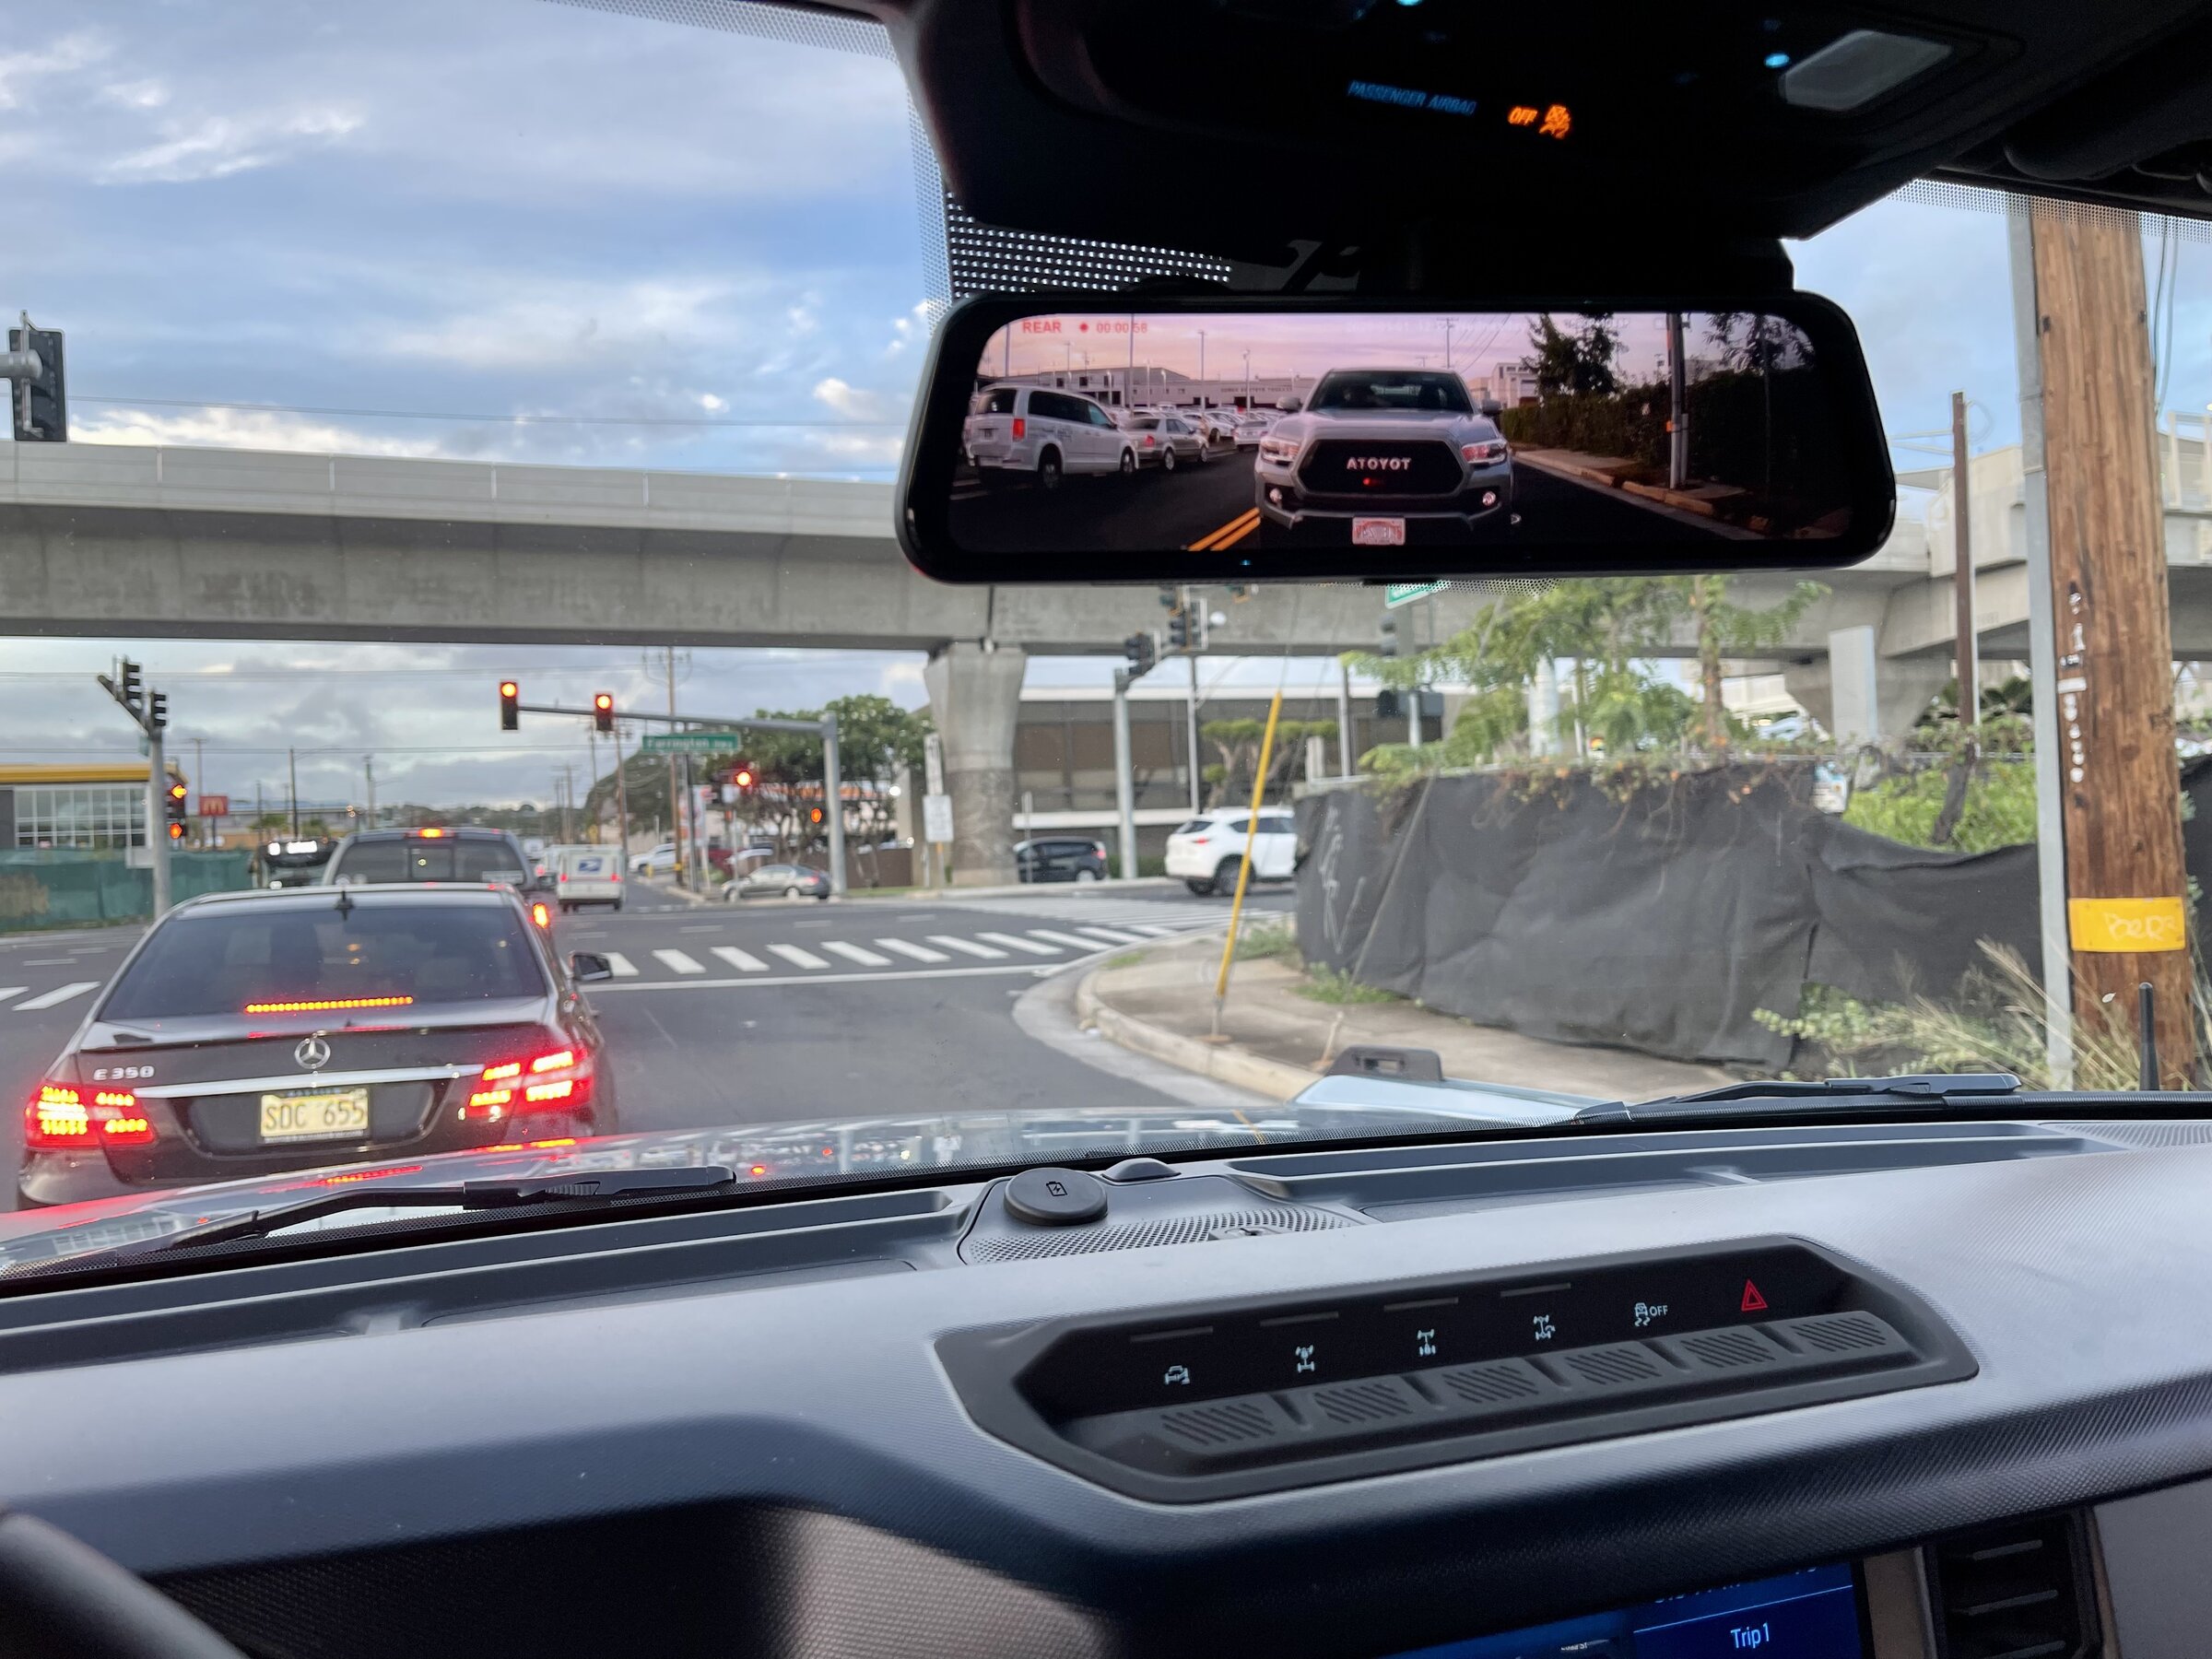 Ford Bronco Cost to install Brandmotion Digital Rearview Mirror/Dashcam @ 4WP Store - $330 a fair price? (Install Complete - Review Begins) E4884750-6F6B-4A5C-BDCF-113514B08D0C